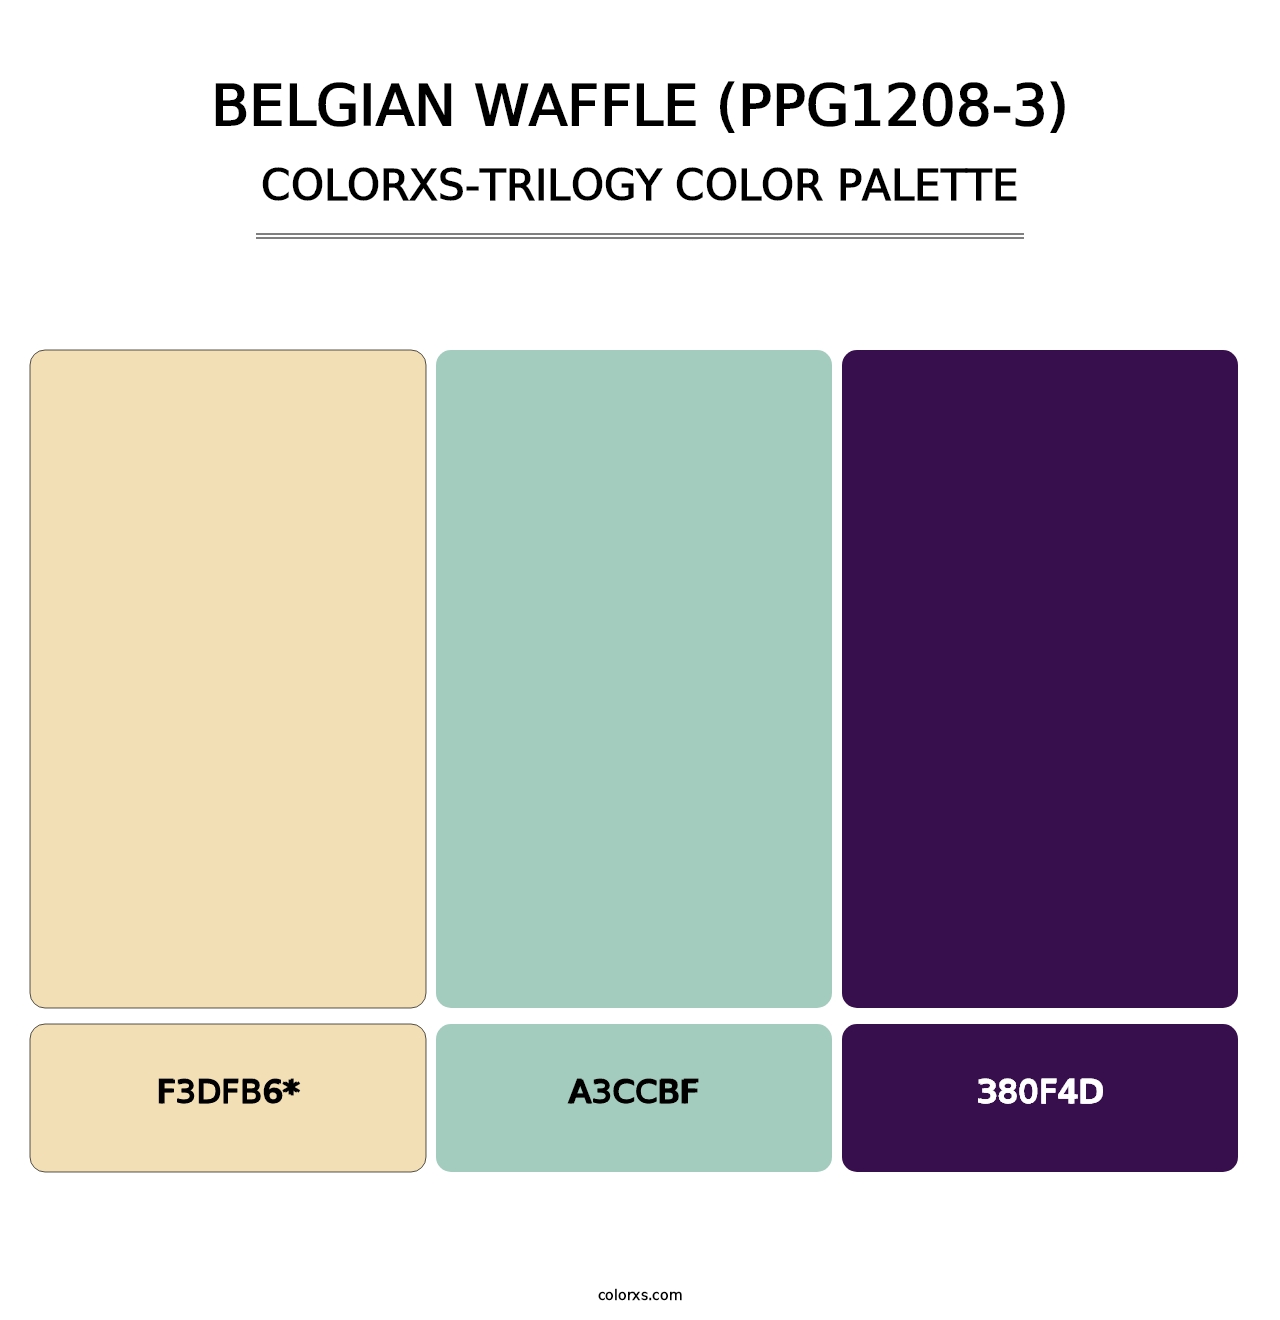 Belgian Waffle (PPG1208-3) - Colorxs Trilogy Palette